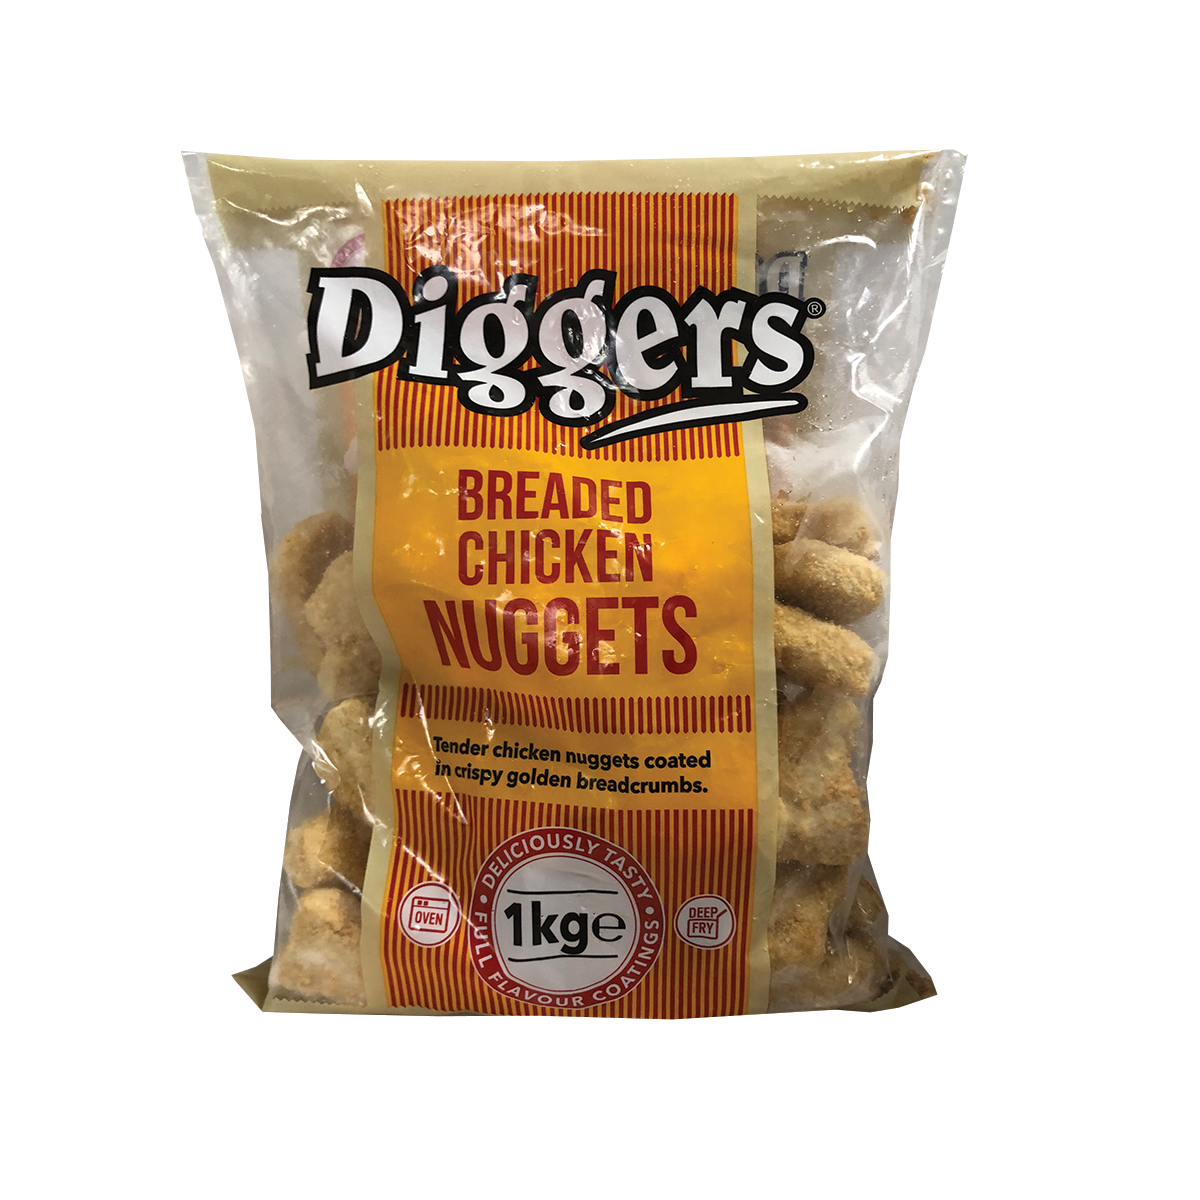 Diggers Breaded Chicken Nuggets